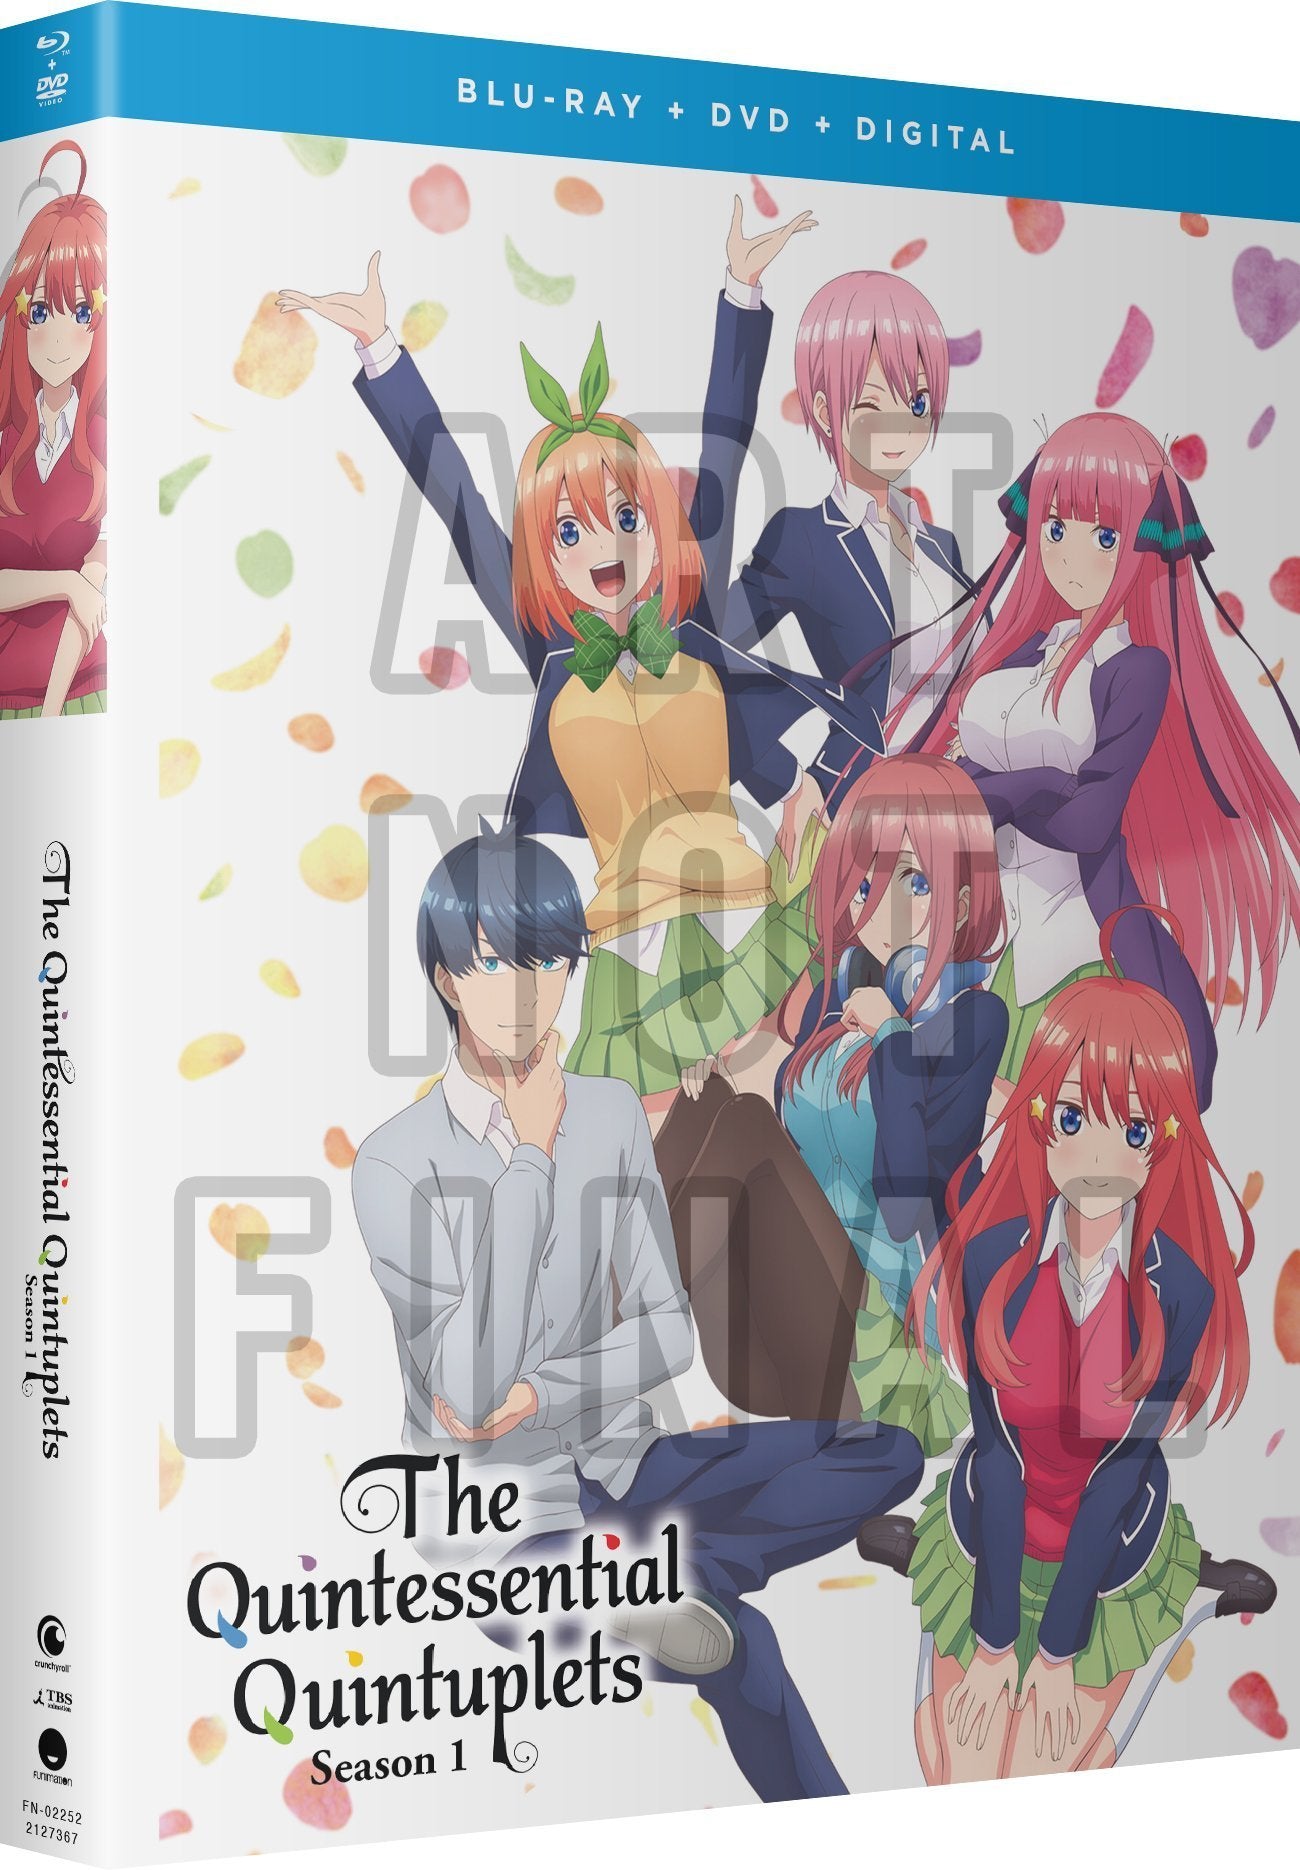 The Quintessential Quintuplets - Season 1 - Blu-ray + DVD image count 1